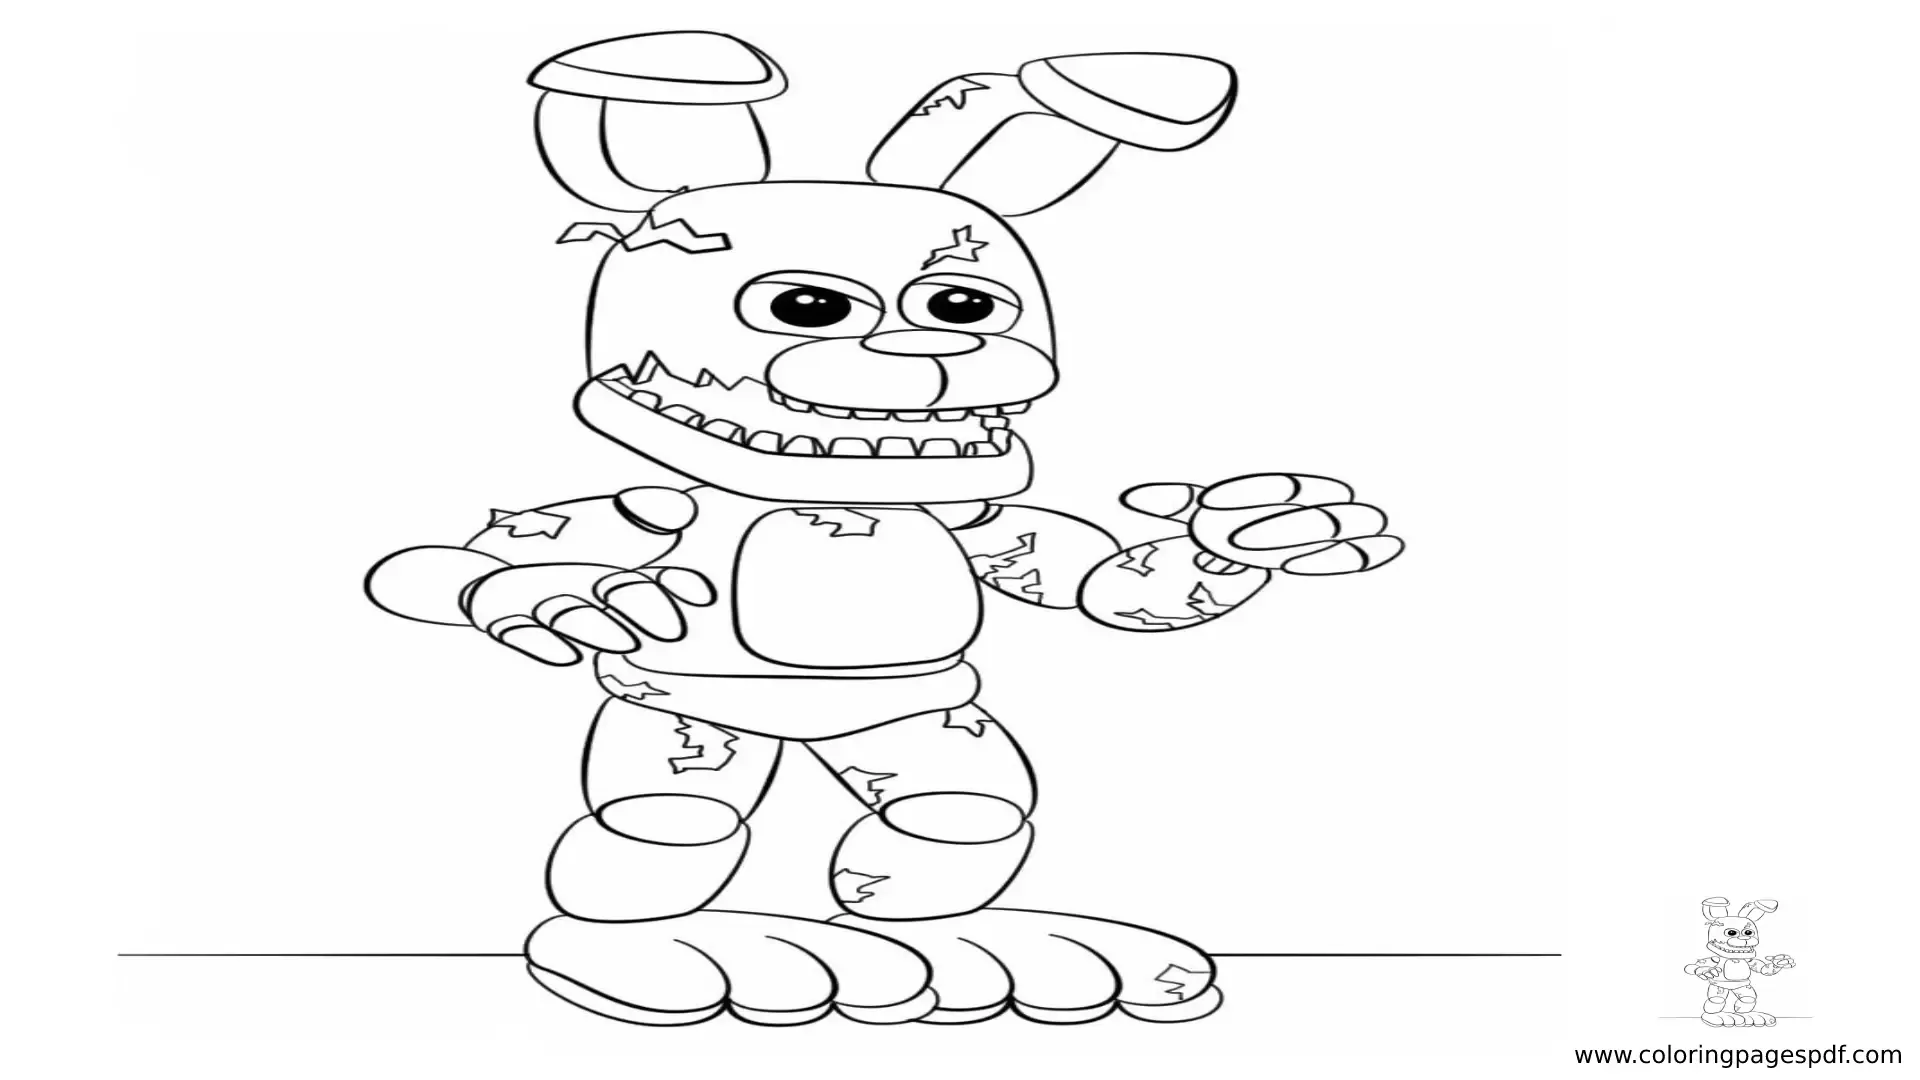 Coloring Pages Of Scarry Bonnie